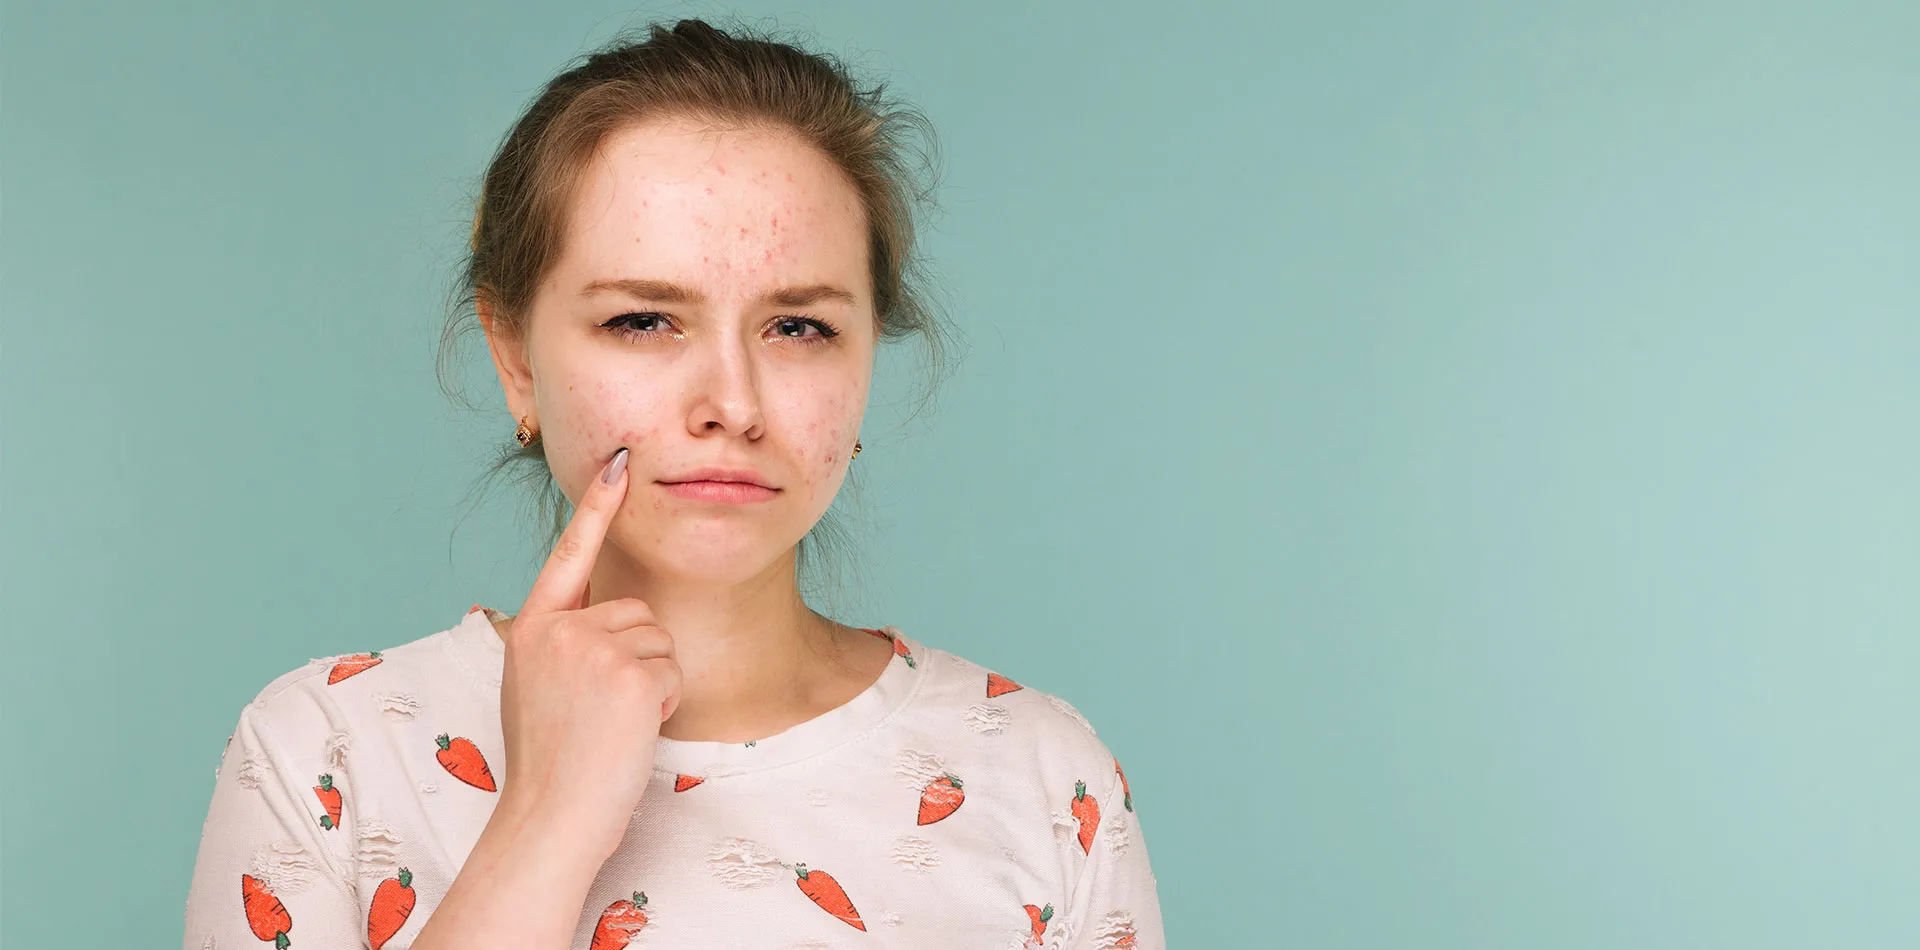 Acne Scars | All You Need to Know | American Hospital Dubai